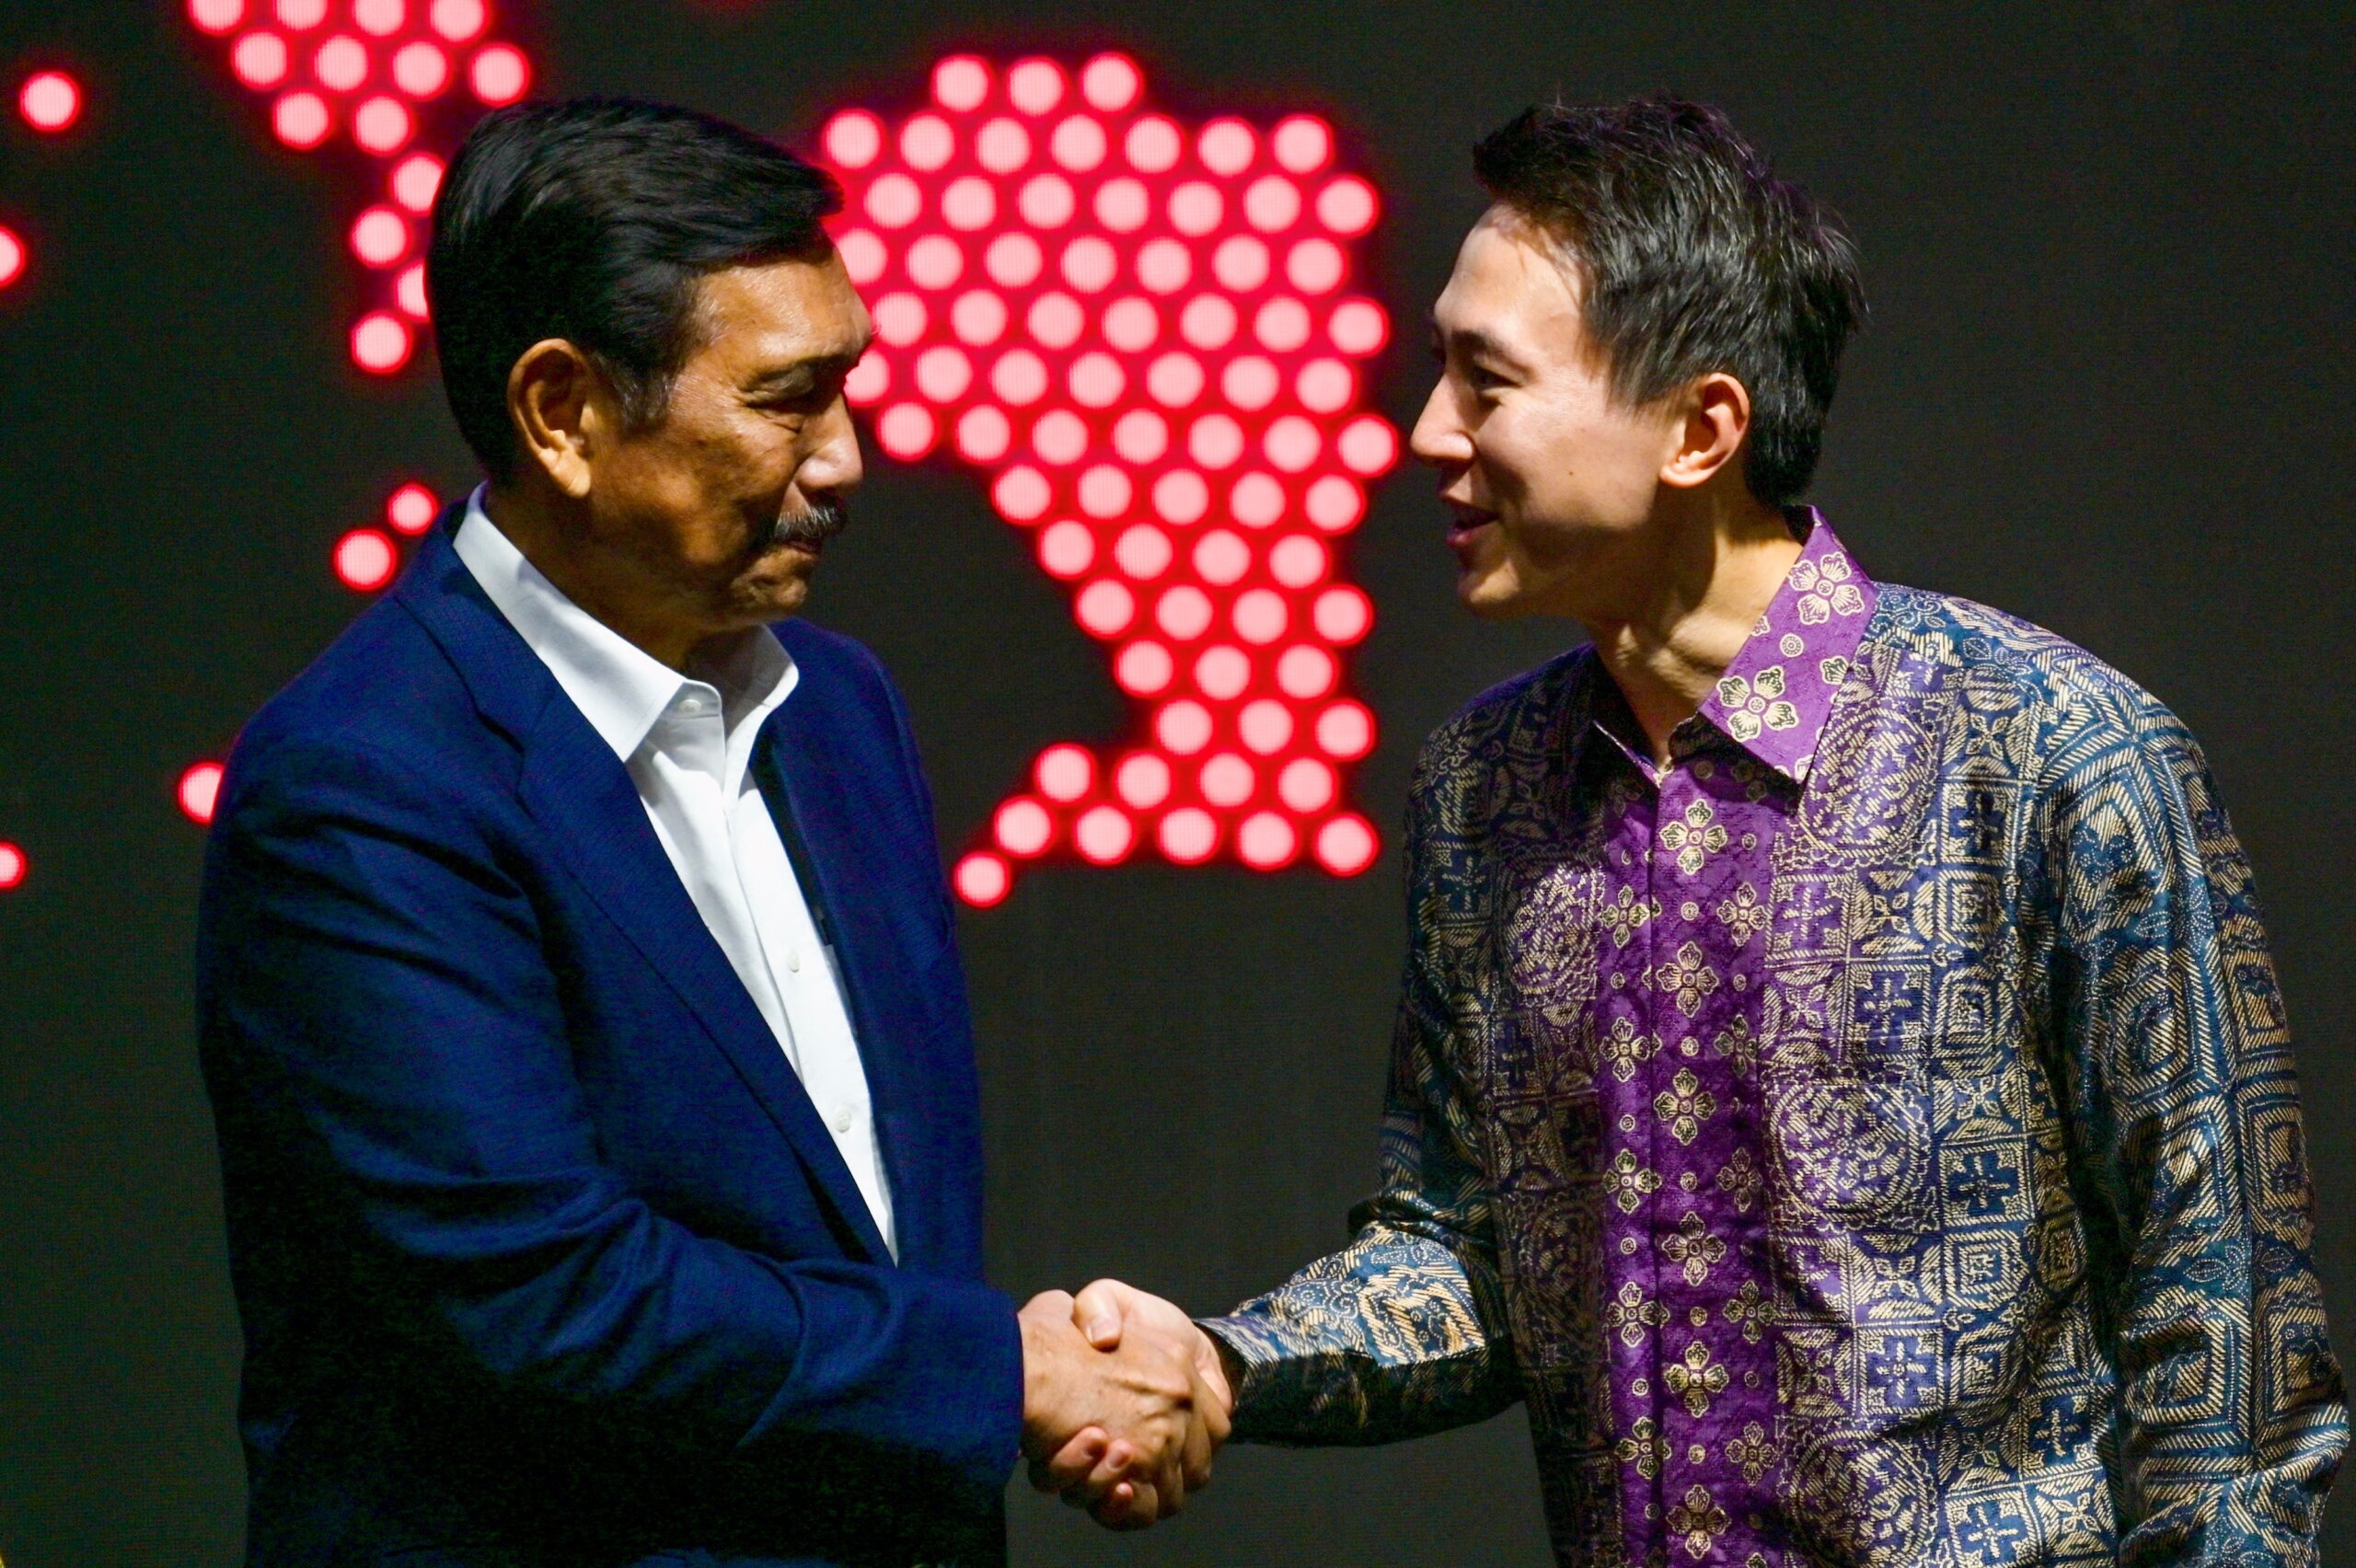 TikTok CEO Shou Zi Chew (R) shakes hands with Indonesian Coordinating Minister for Maritime Affairs and Investment Luhut Binsar Pandjaitan during the TikTok Southeast Asia Impact Forum 2023 in Jakarta on June 15, 2023. (Photo by BAY ISMOYO / AFP)